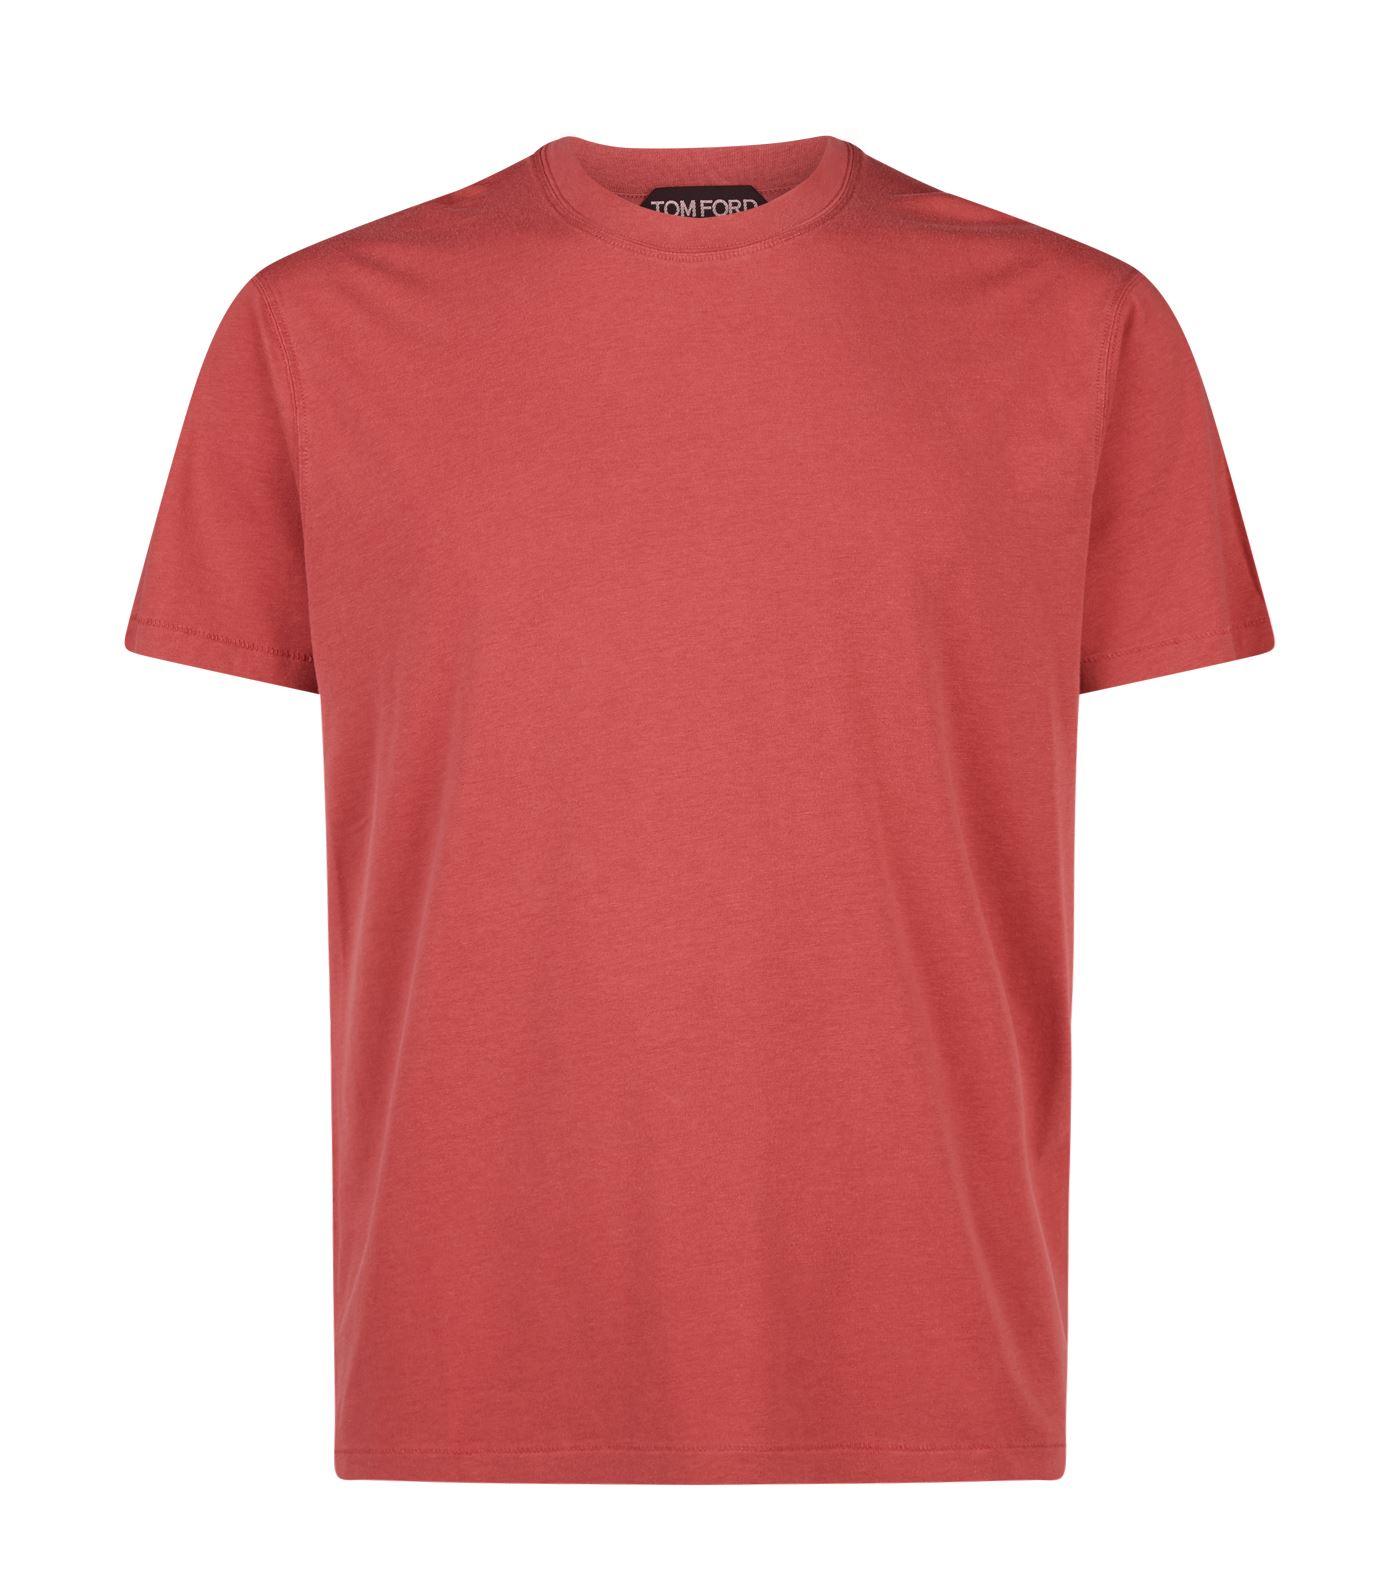 Tom Ford Cotton-blend T-shirt in Red for Men - Lyst